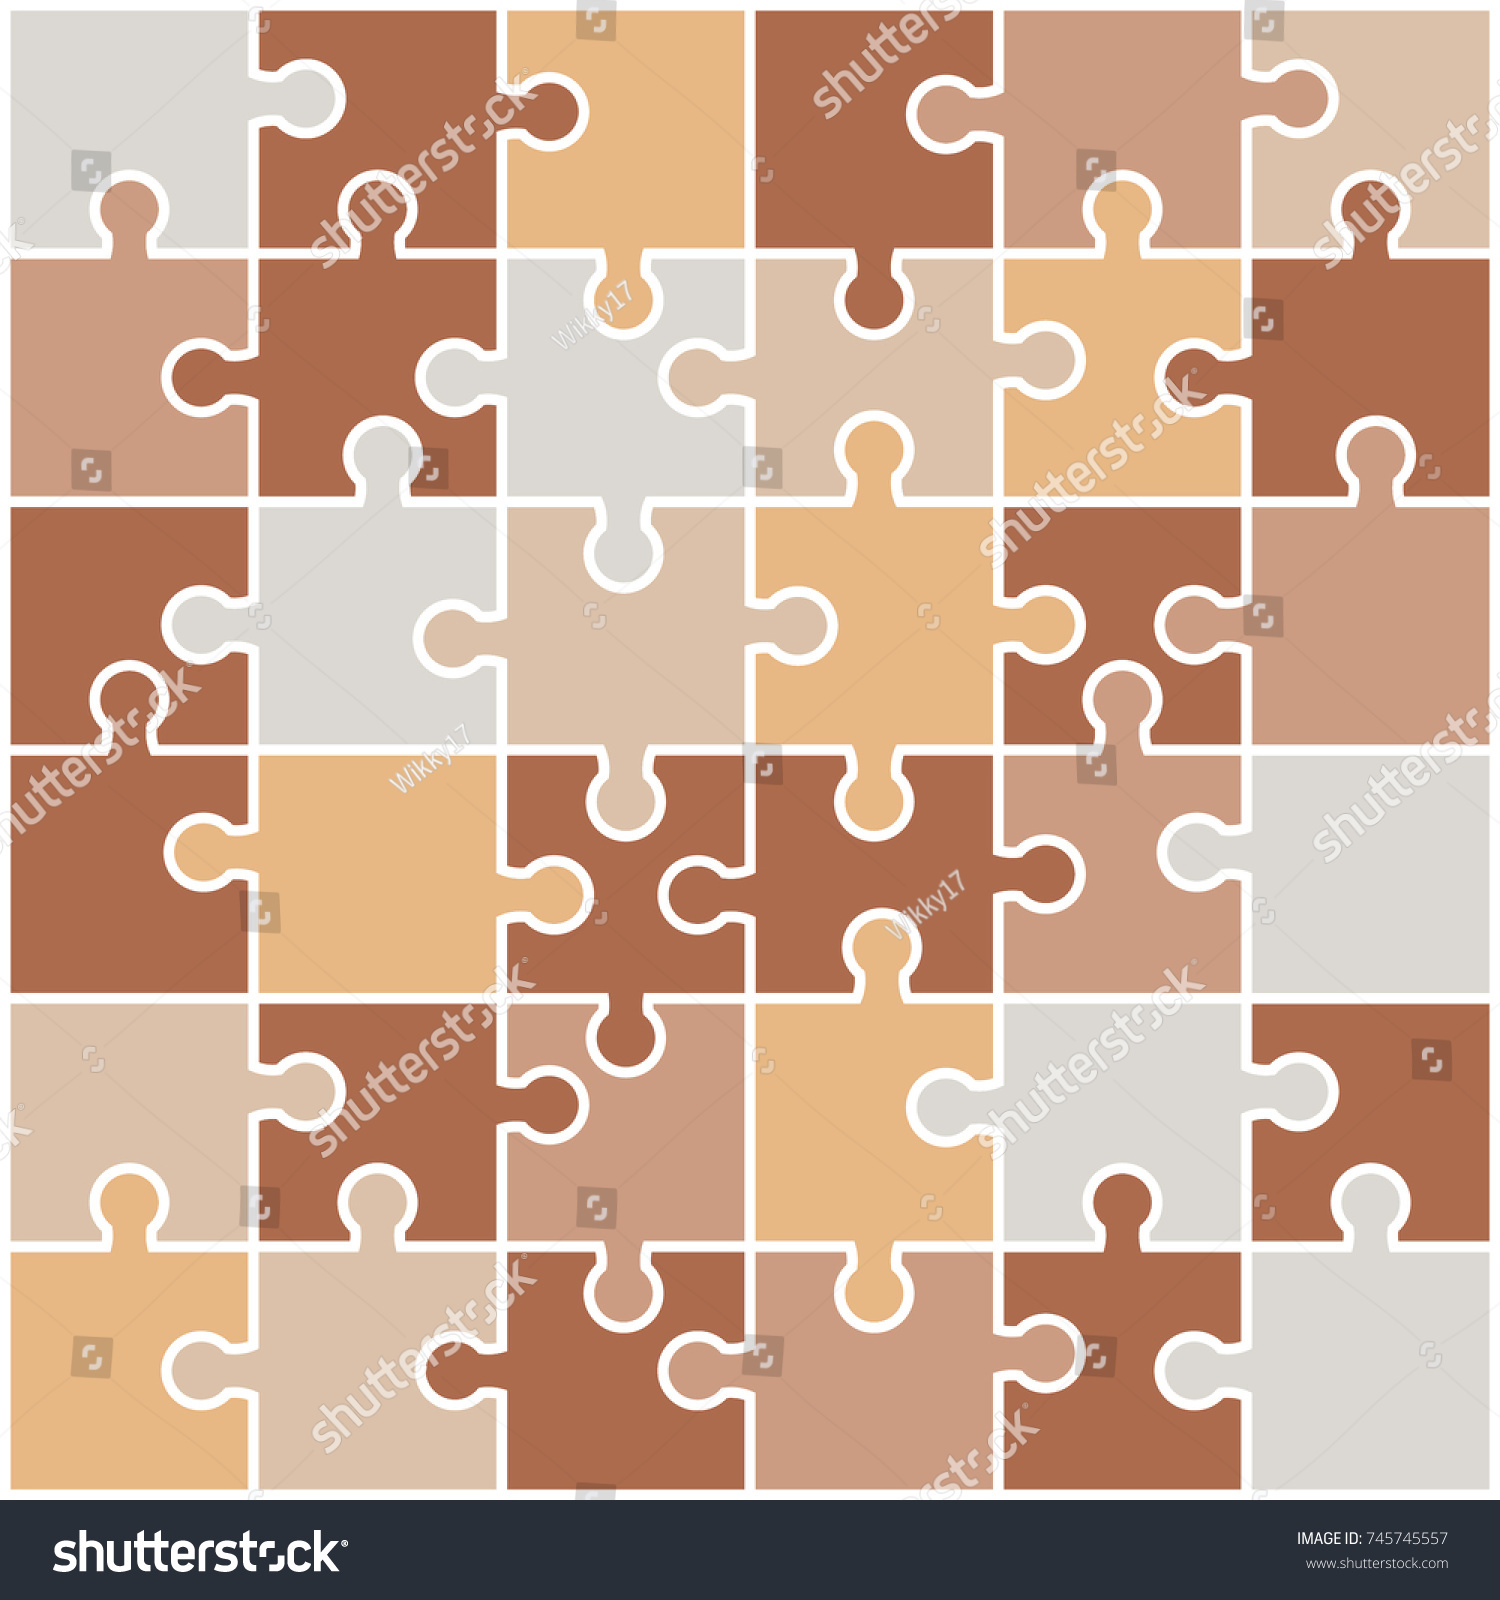 Jigsaw Colorful Puzzle Nude Color Puzzle Stock Vector (Royalty Free) 745745...